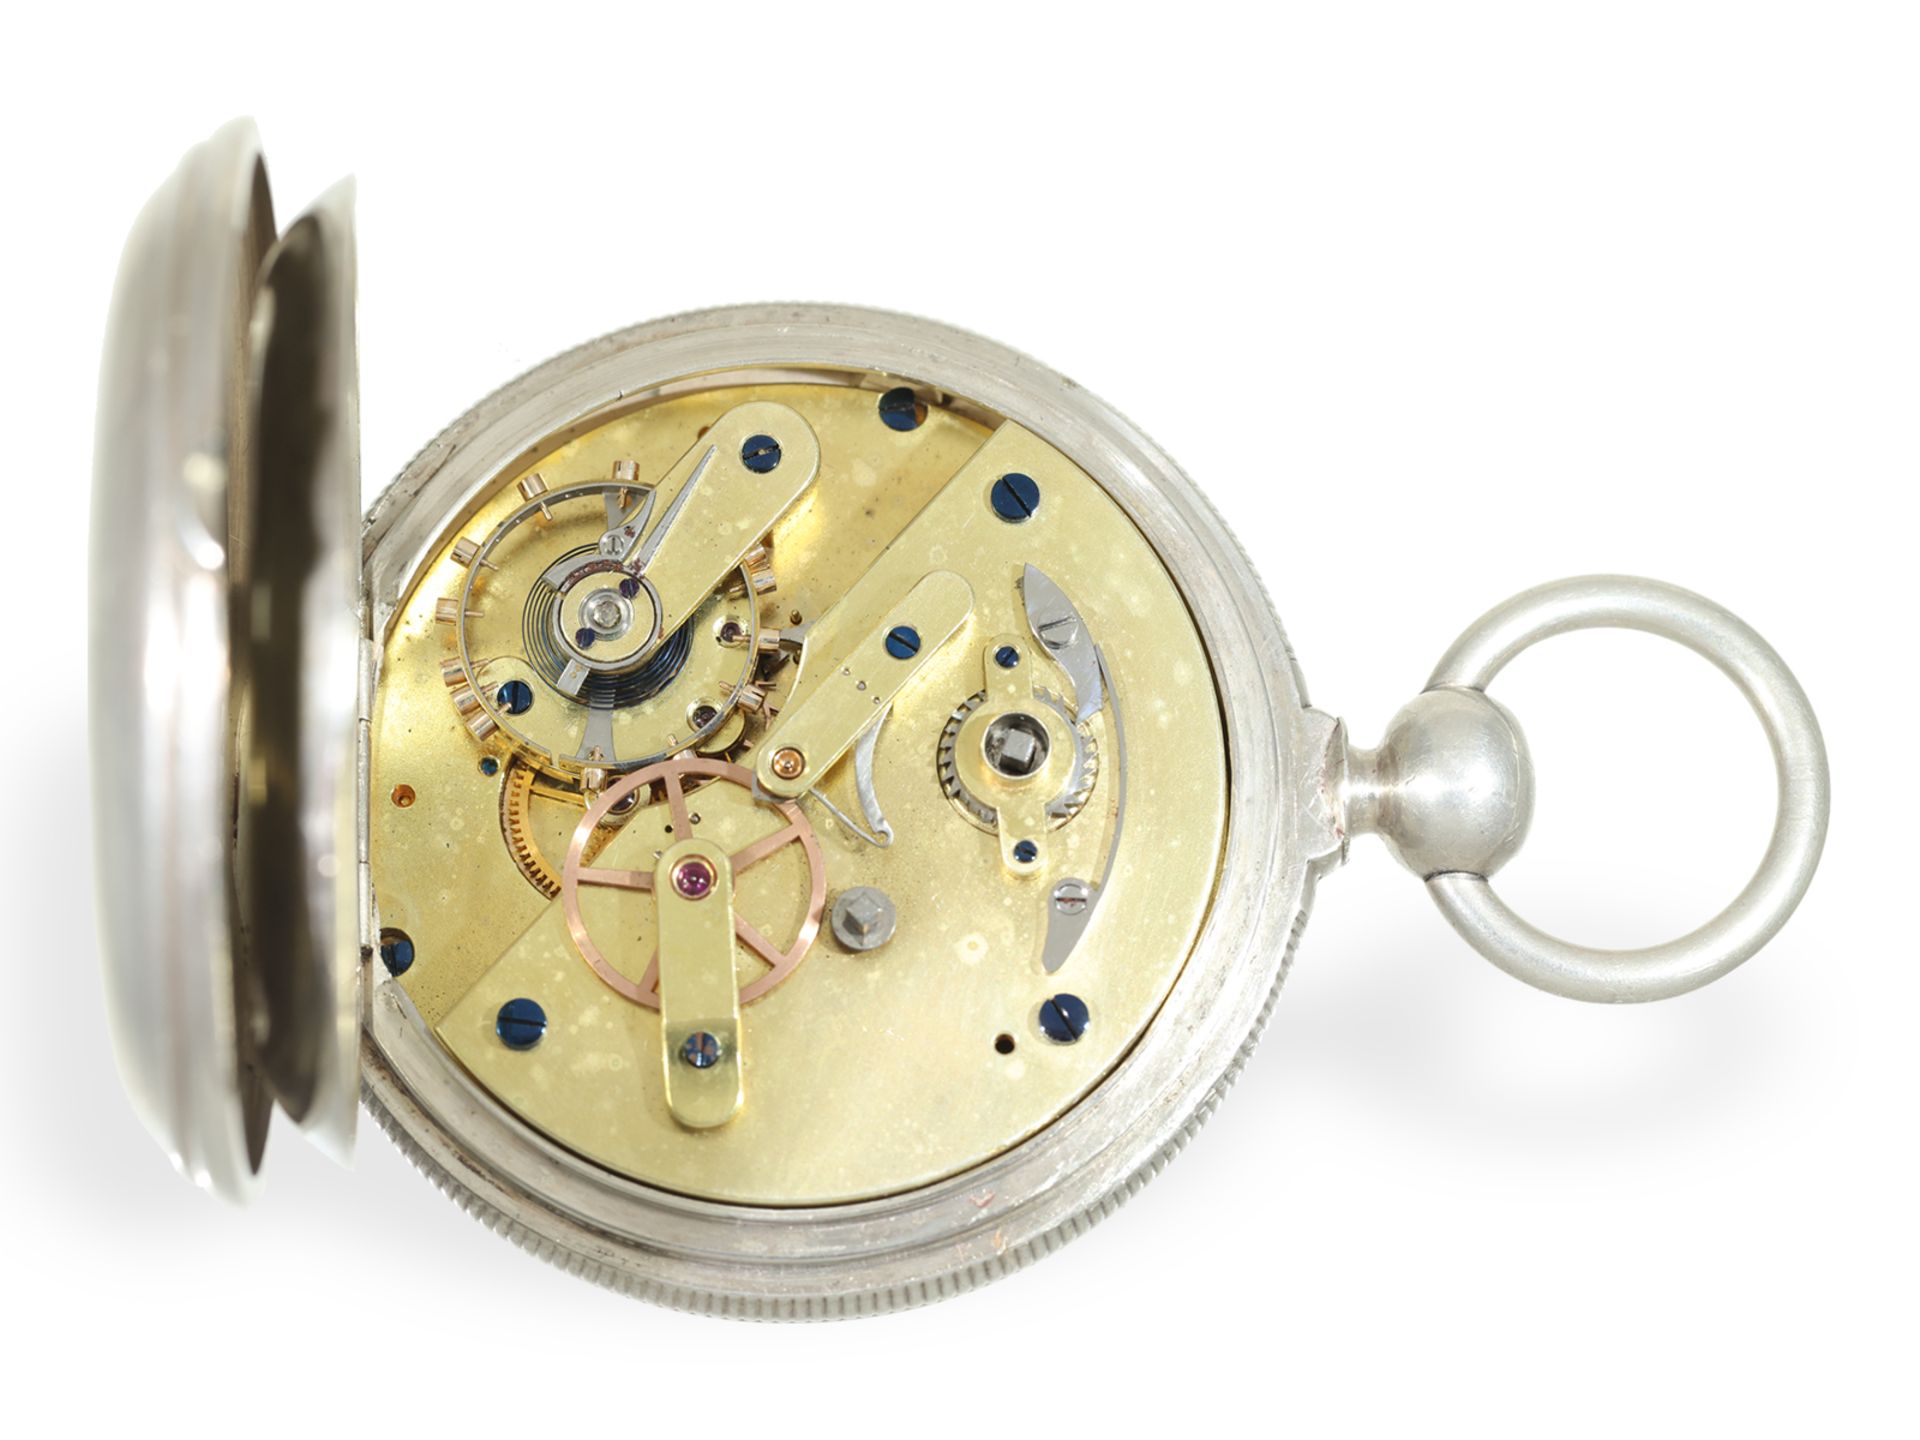 Pocket watch: extremely rare French deck chronometer, Rötig Havre "Inventeur", ca. 1865 - Image 3 of 7